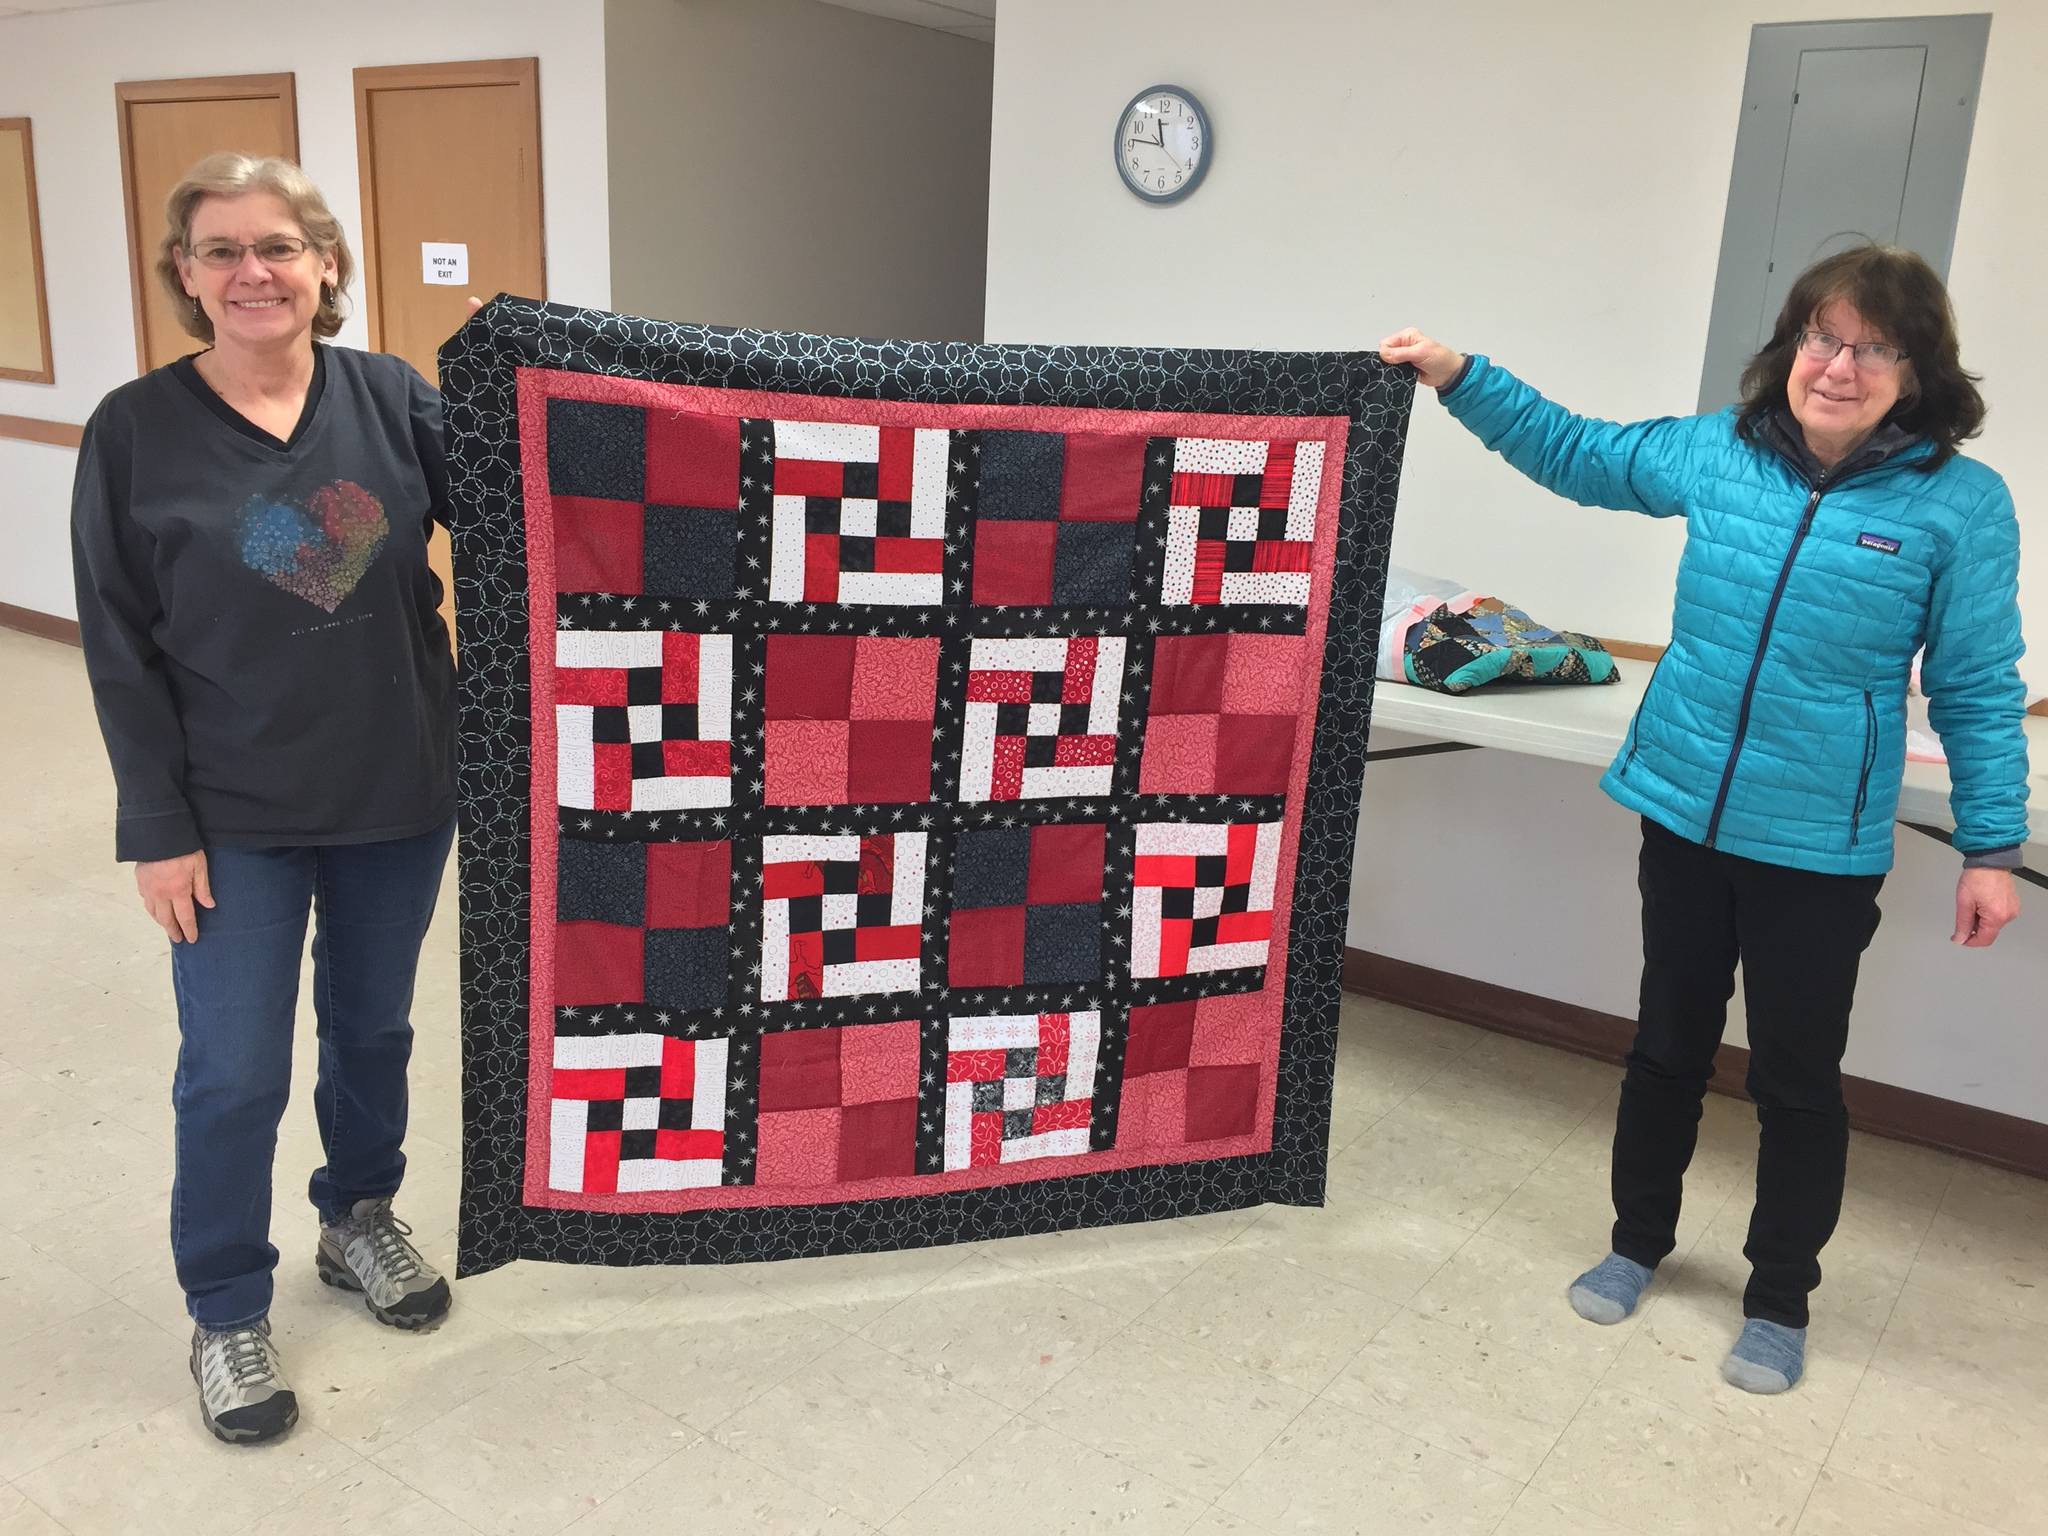 Photo provided Members of the Kachemak Bay Quilters show off one of their quilts.